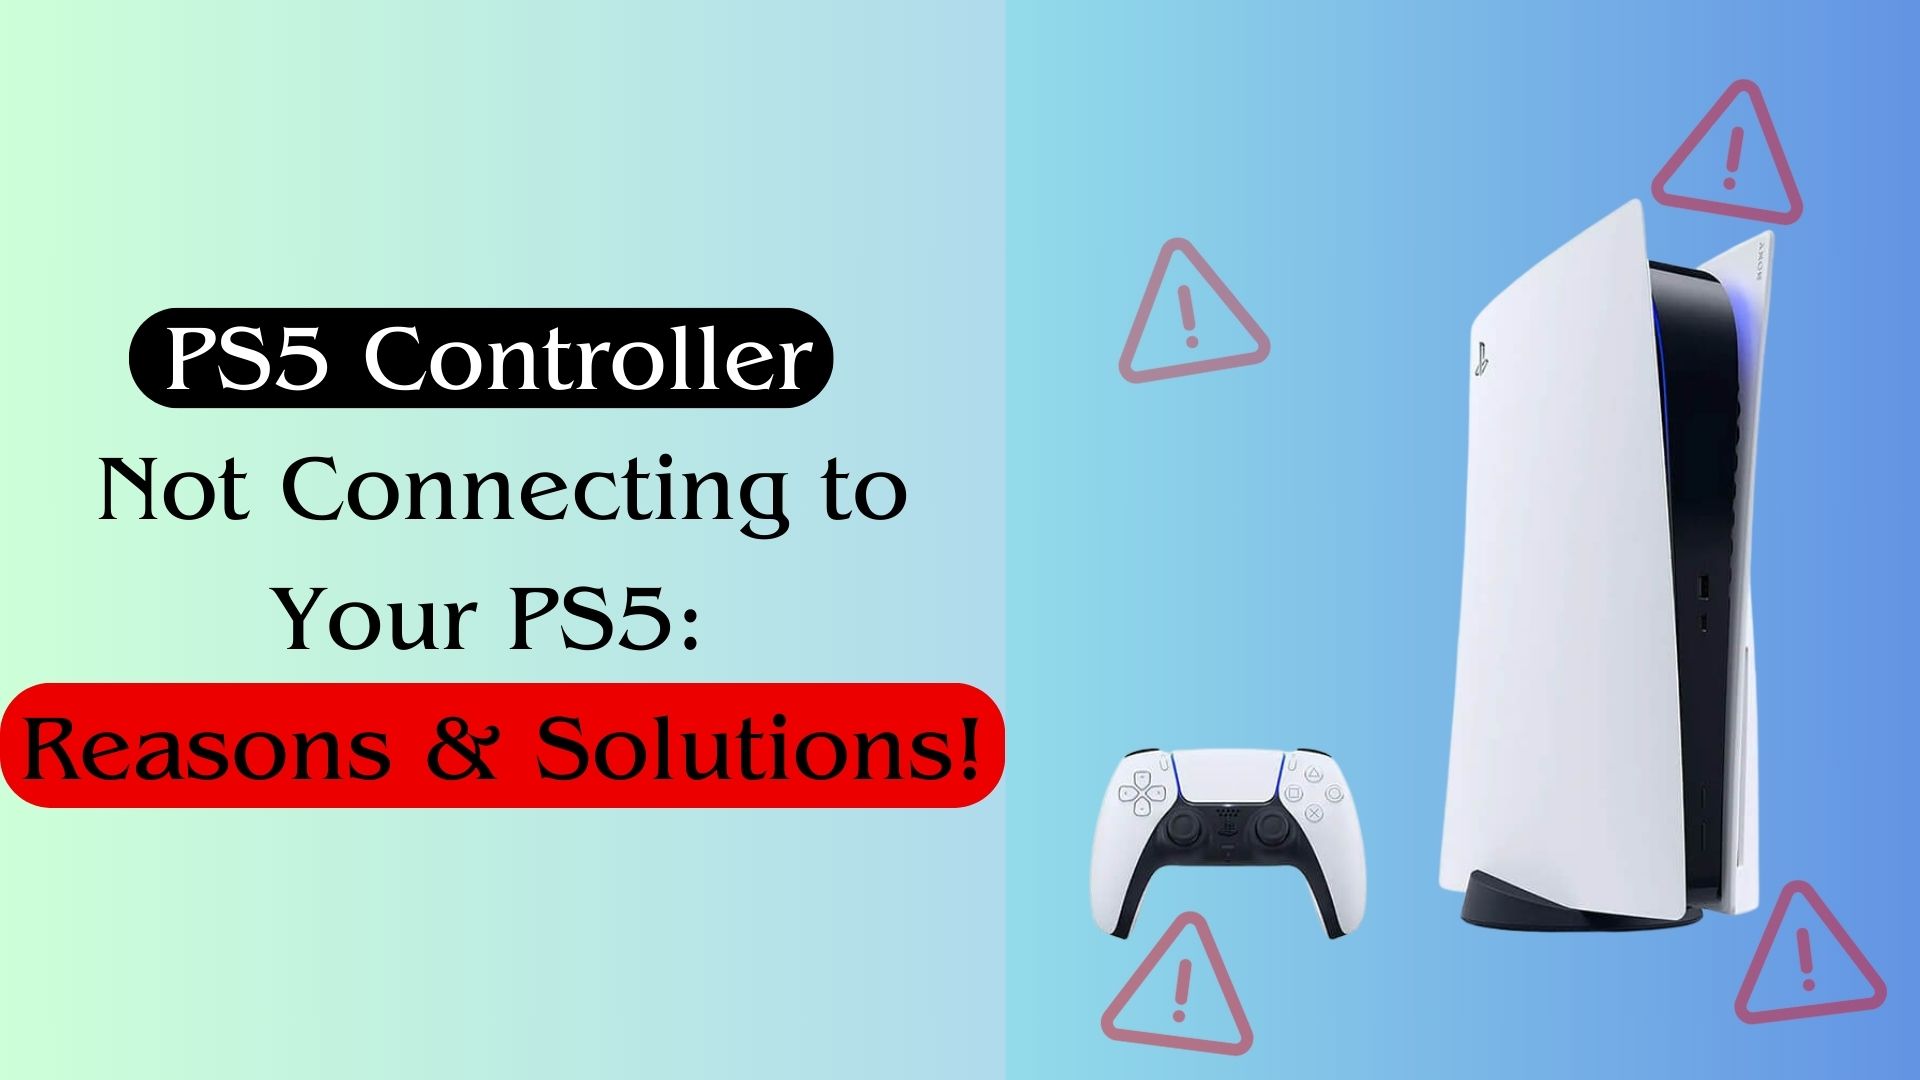 PS5 Controller Not Connecting to Your PS5 or PC: Reasons & Solutions!